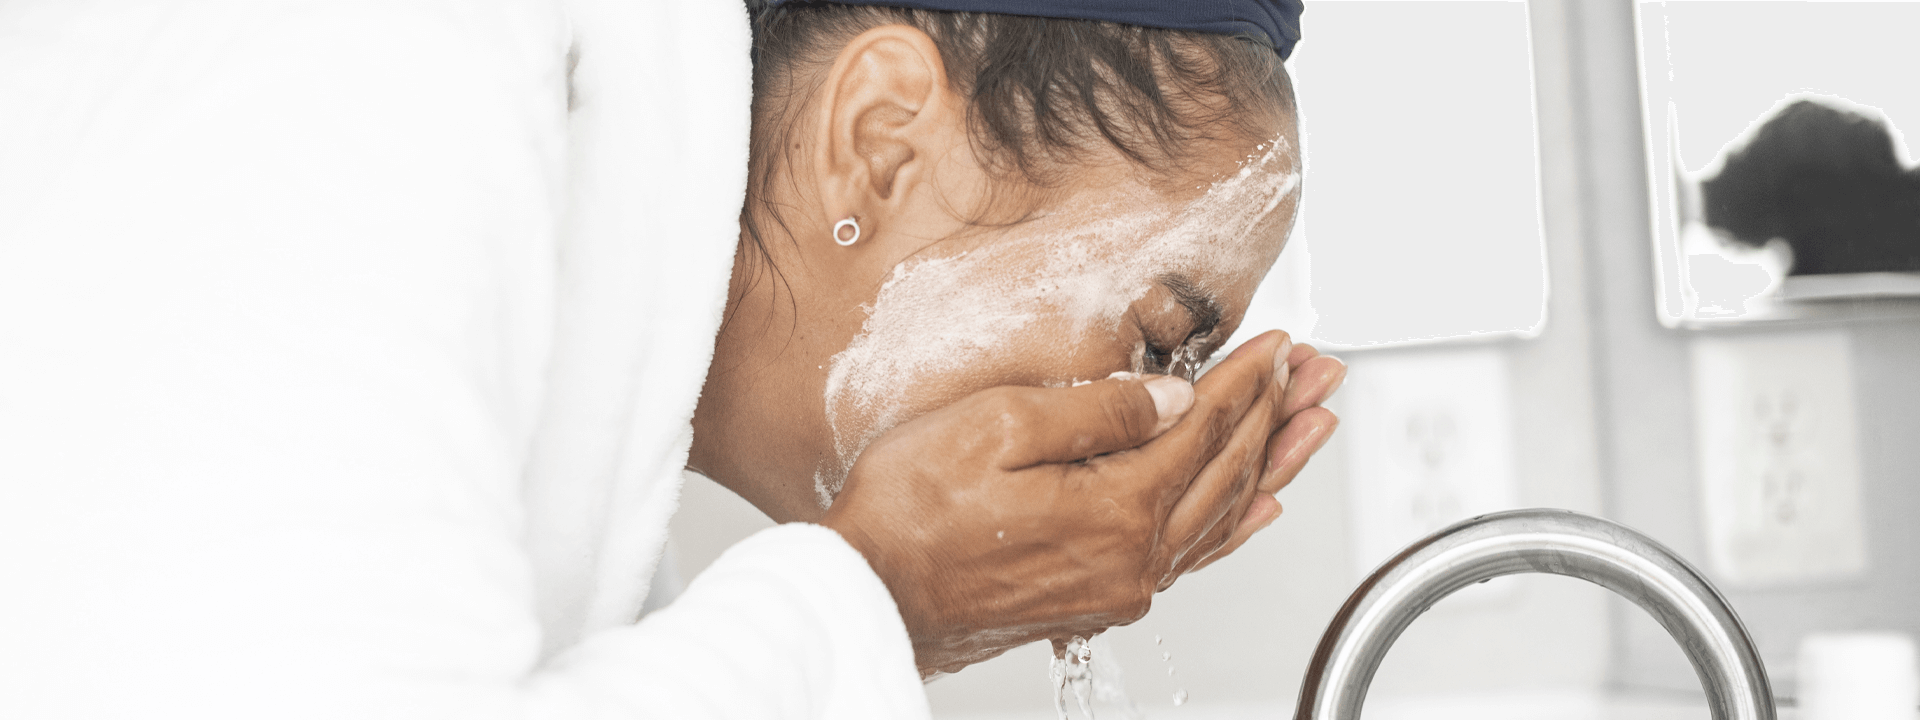 Are You Cleaning Your Face Properly?